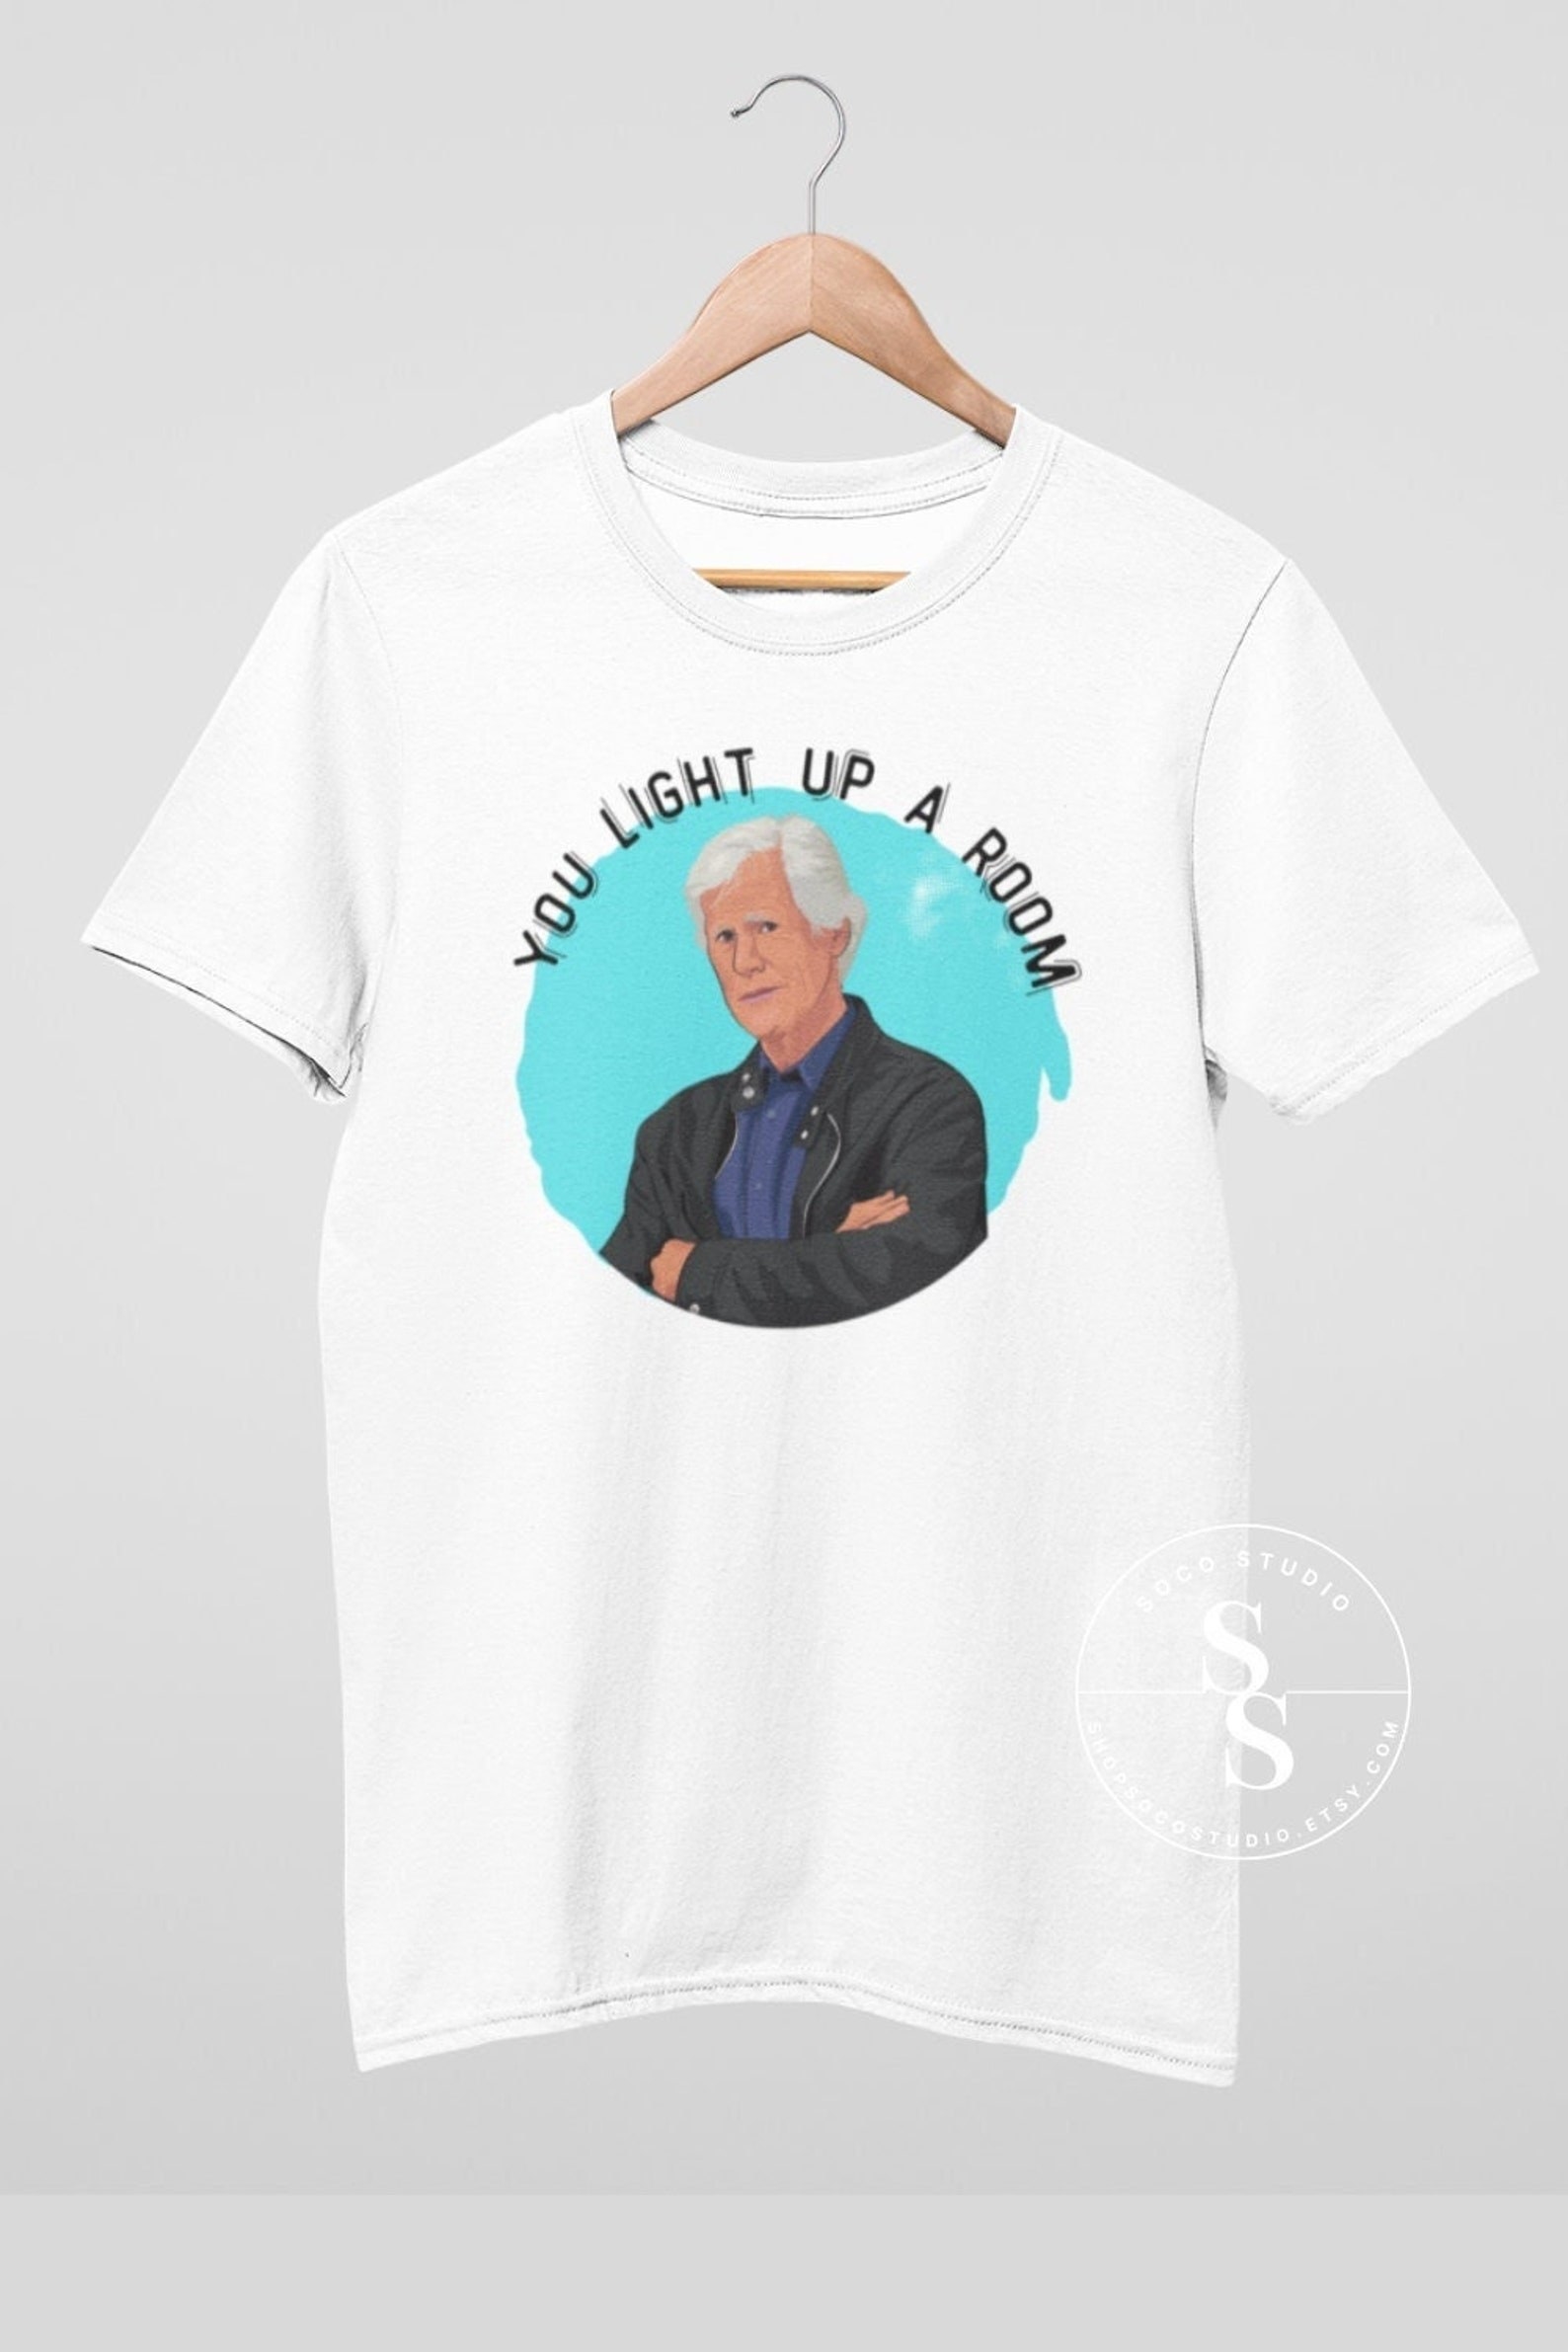 A white tee with Keith Morrison&#x27;s face and text &quot;you light up a room&quot;